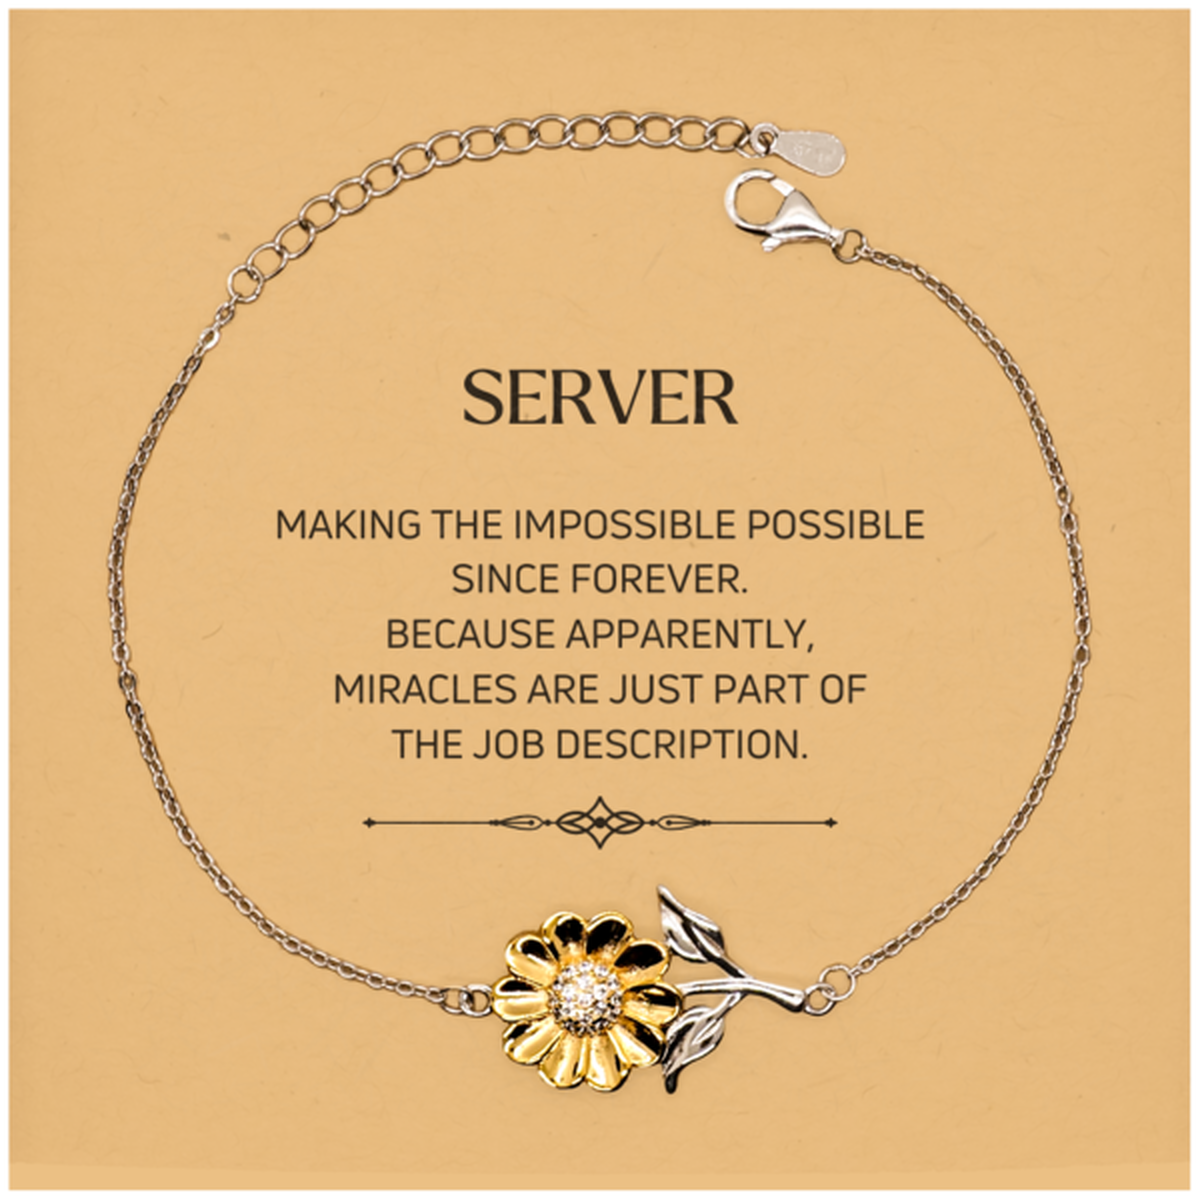 Funny Server Gifts, Miracles are just part of the job description, Inspirational Birthday Christmas Sunflower Bracelet For Server, Men, Women, Coworkers, Friends, Boss